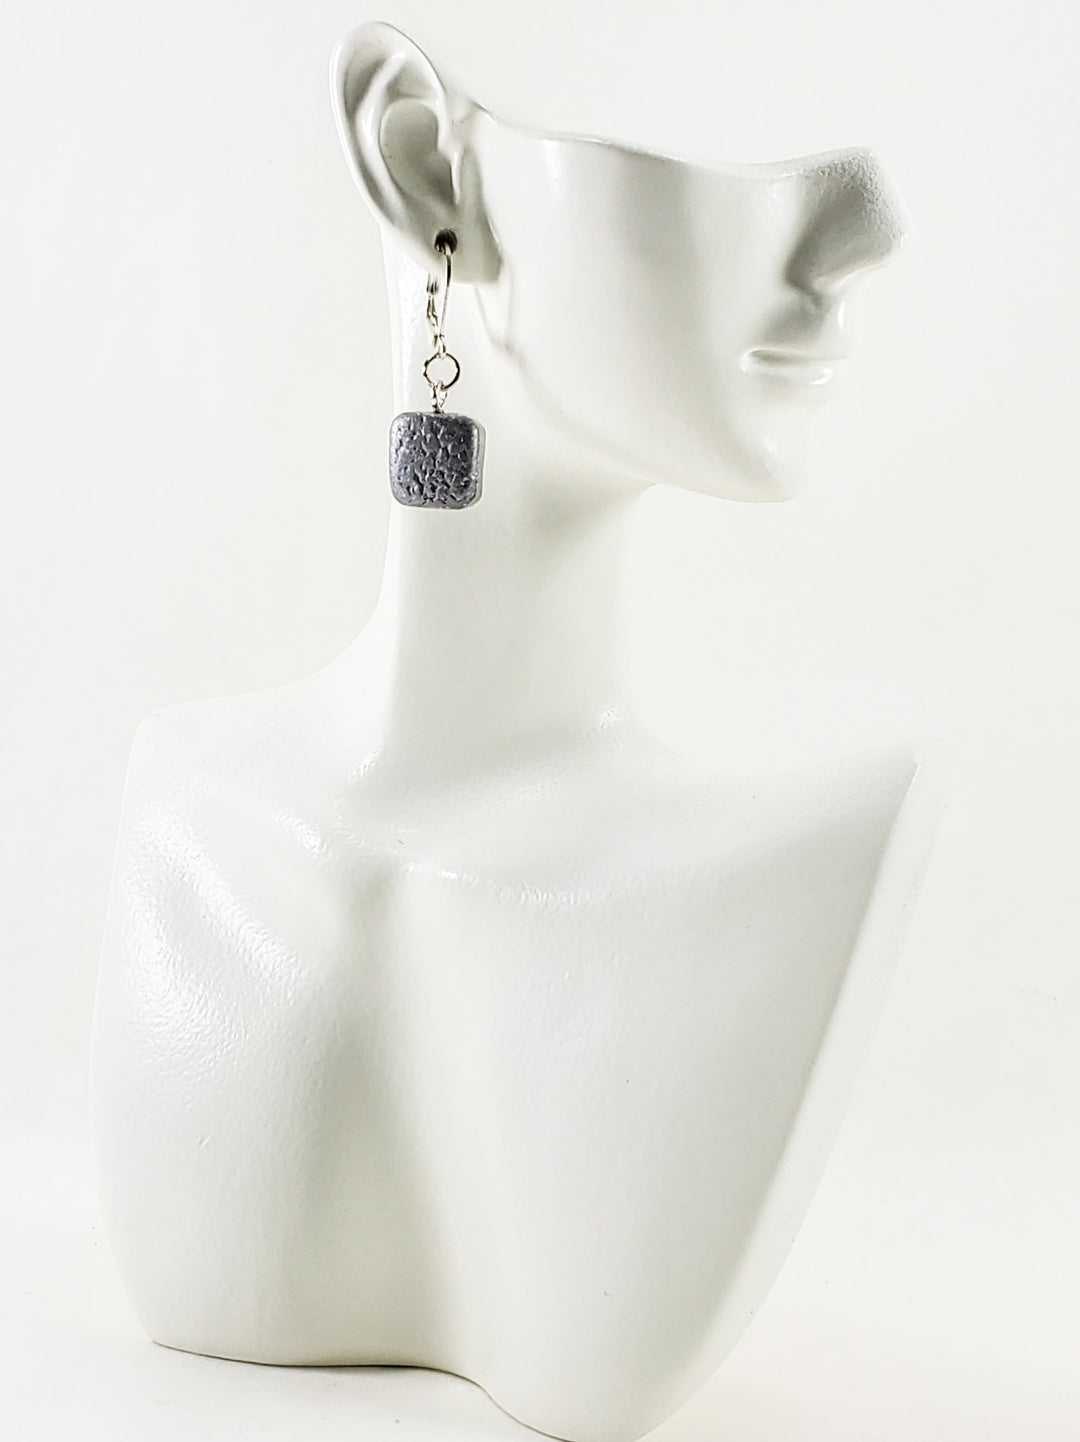 Small Square Dangle Earring - Silver-Earrings-PME07 Silver-Silver-Tiry Originals, LLC